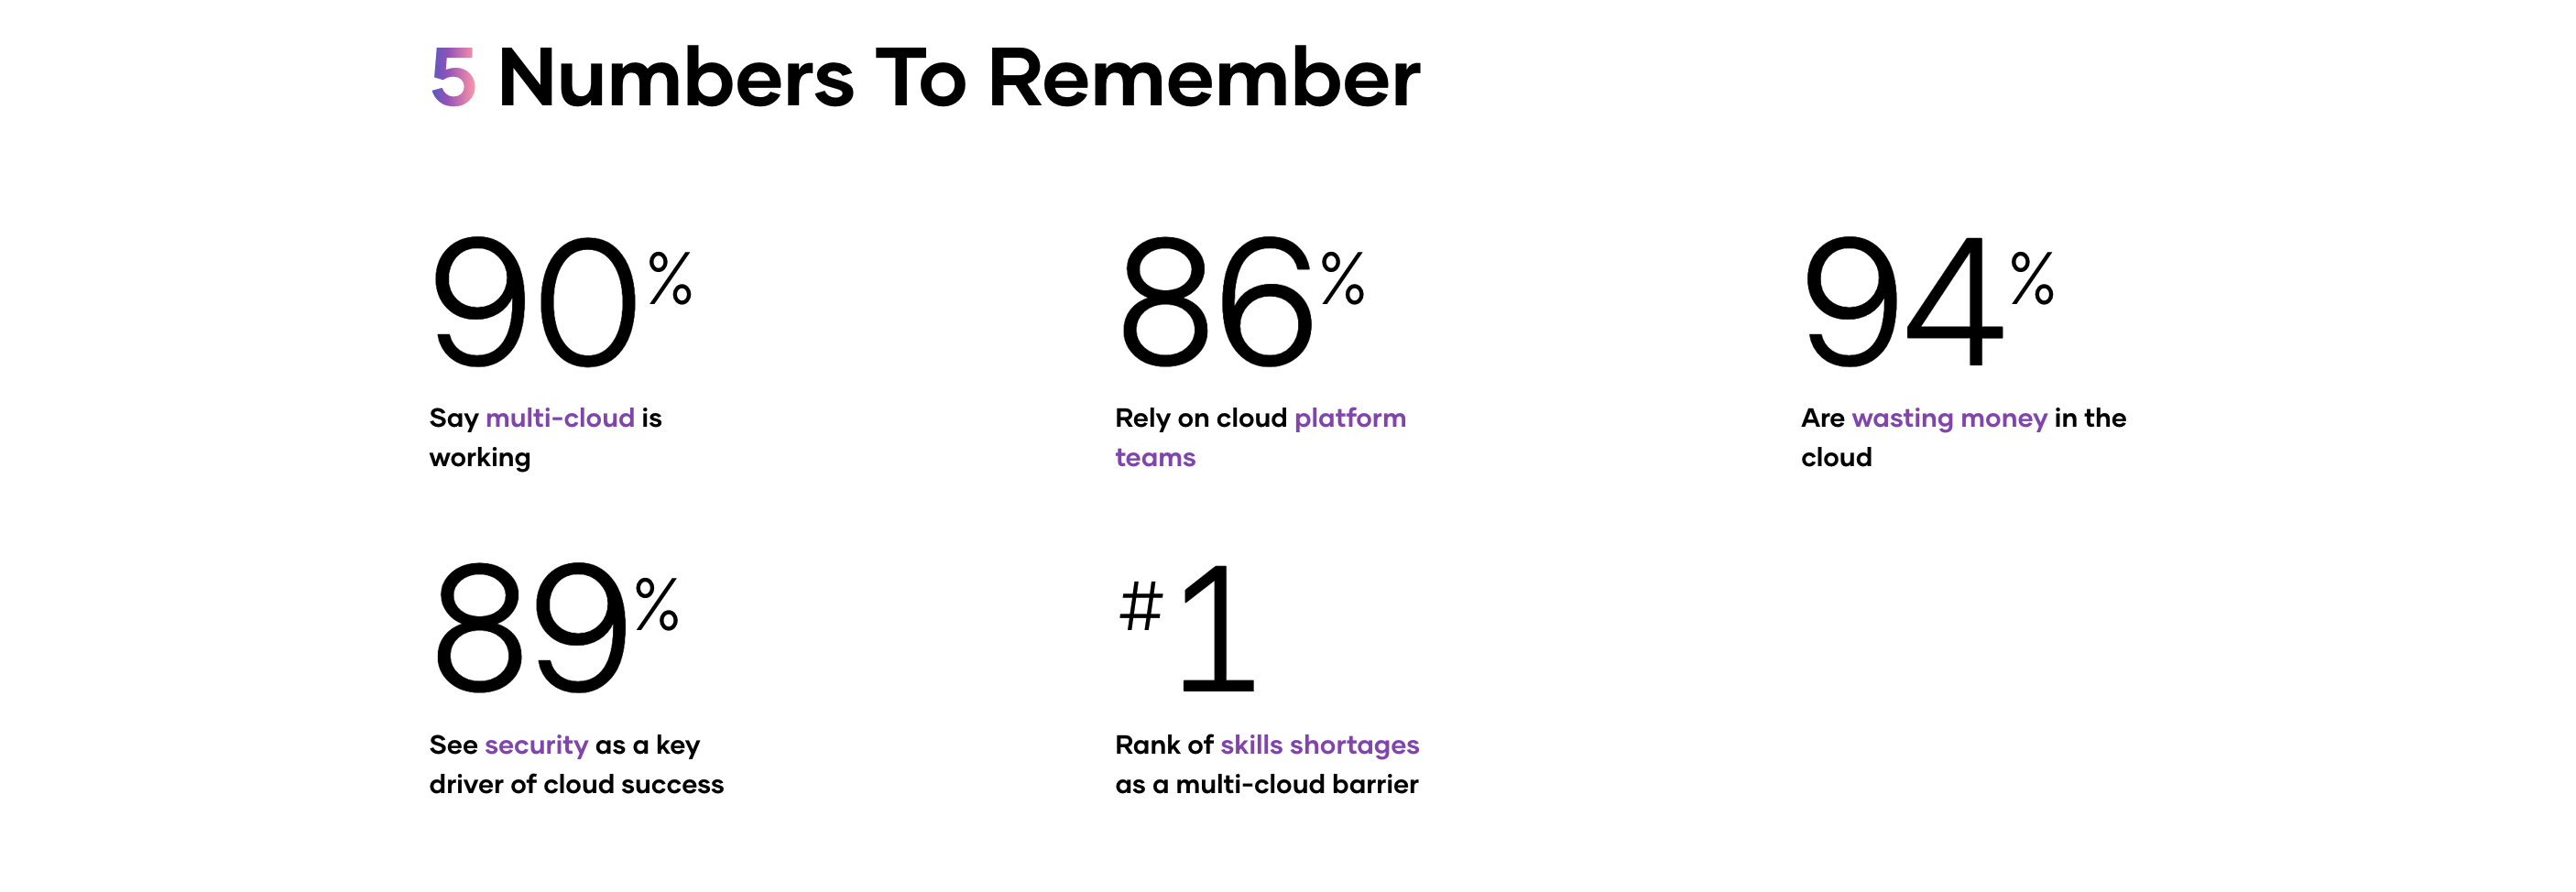 90% say multi-cloud is working, 86% rely on cloud platform teams, 94% are wasting money in the cloud, 89% see security as a key driver of cloud success, #1 is the rank of skills shortages as a multi-cloud barrier